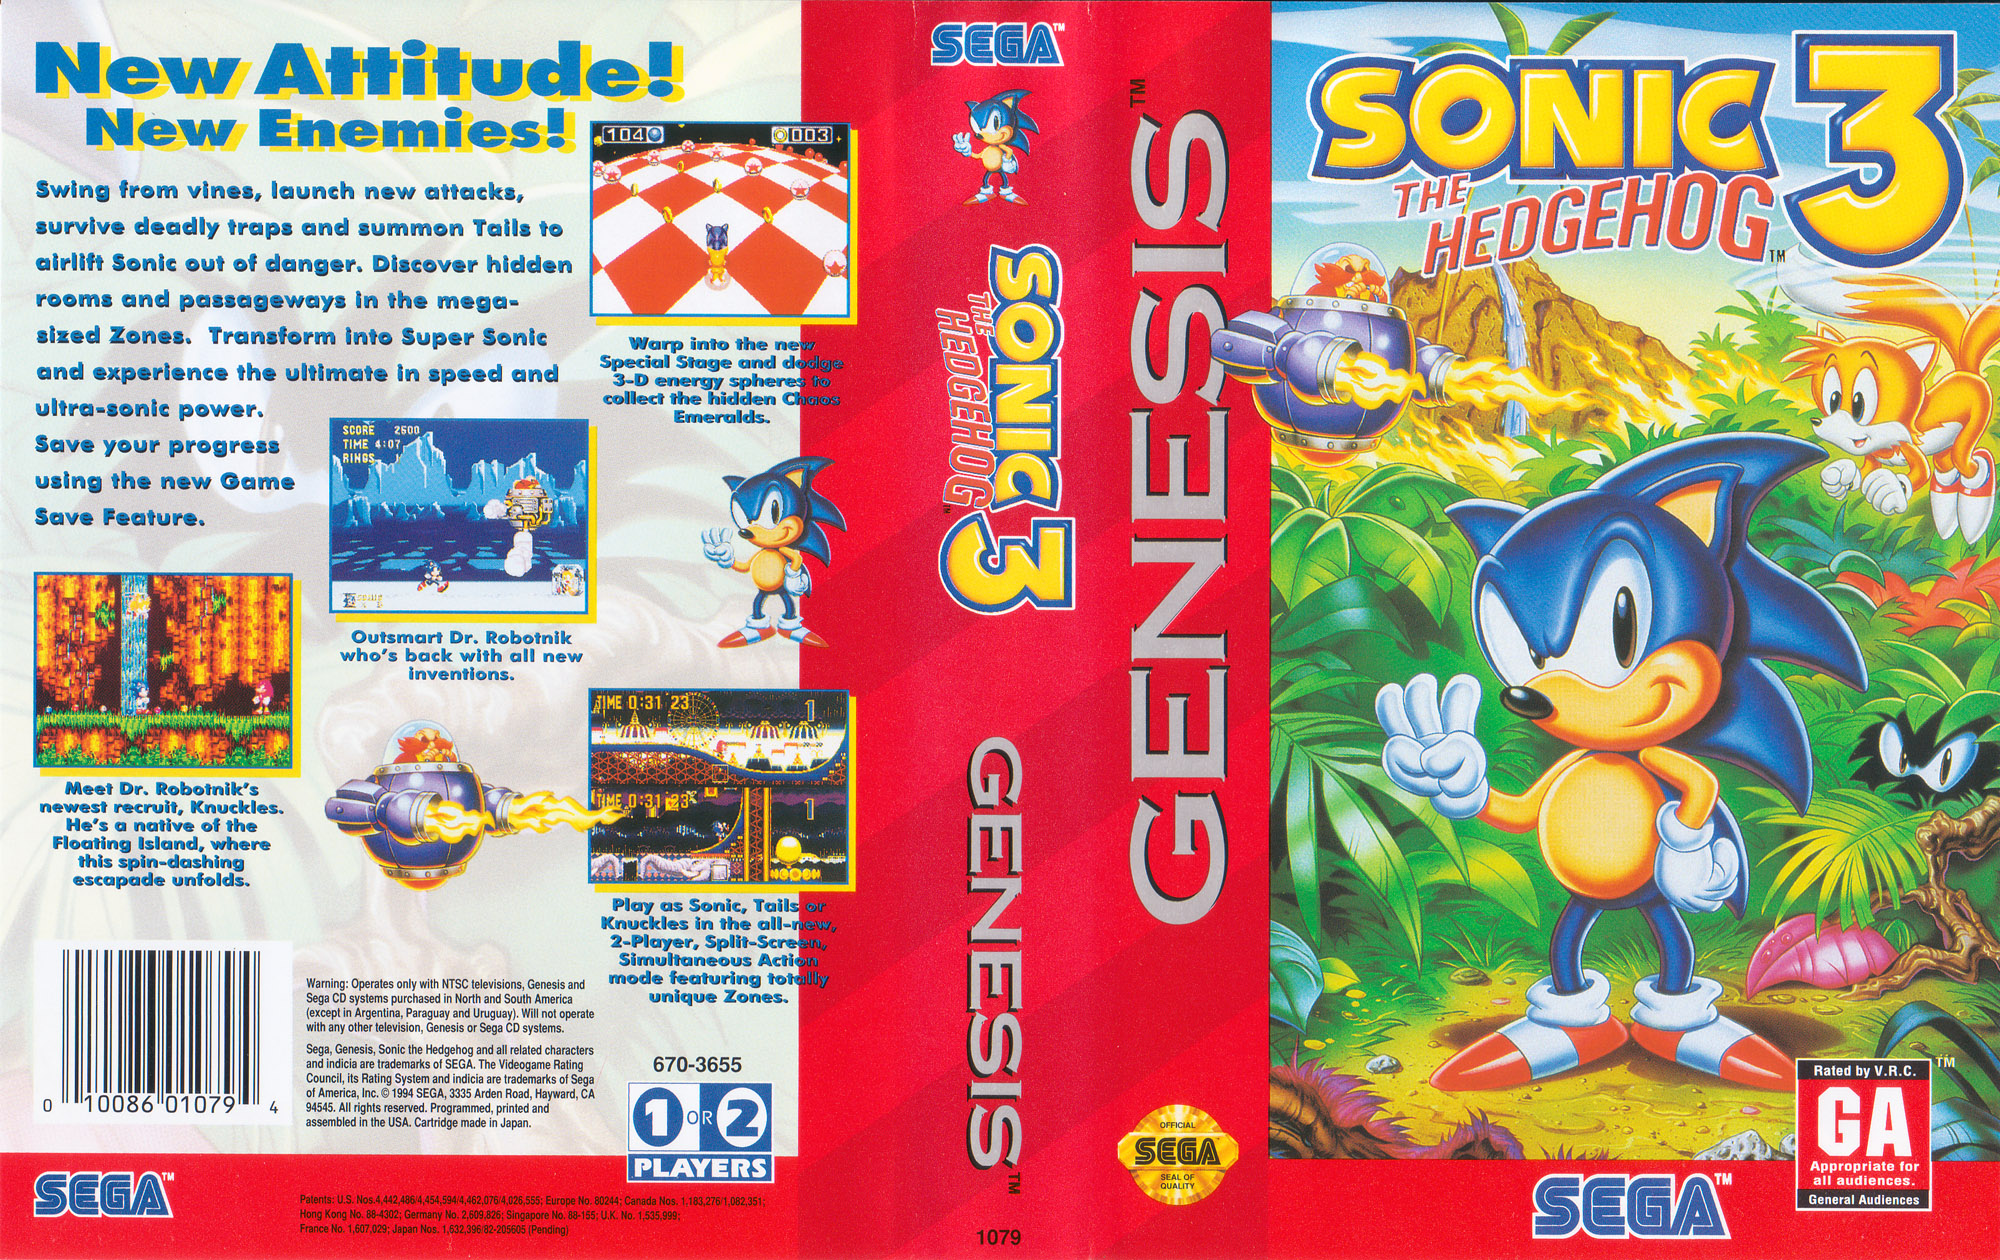 Sonic the Hedgehog 3 (US cover / physical scan)